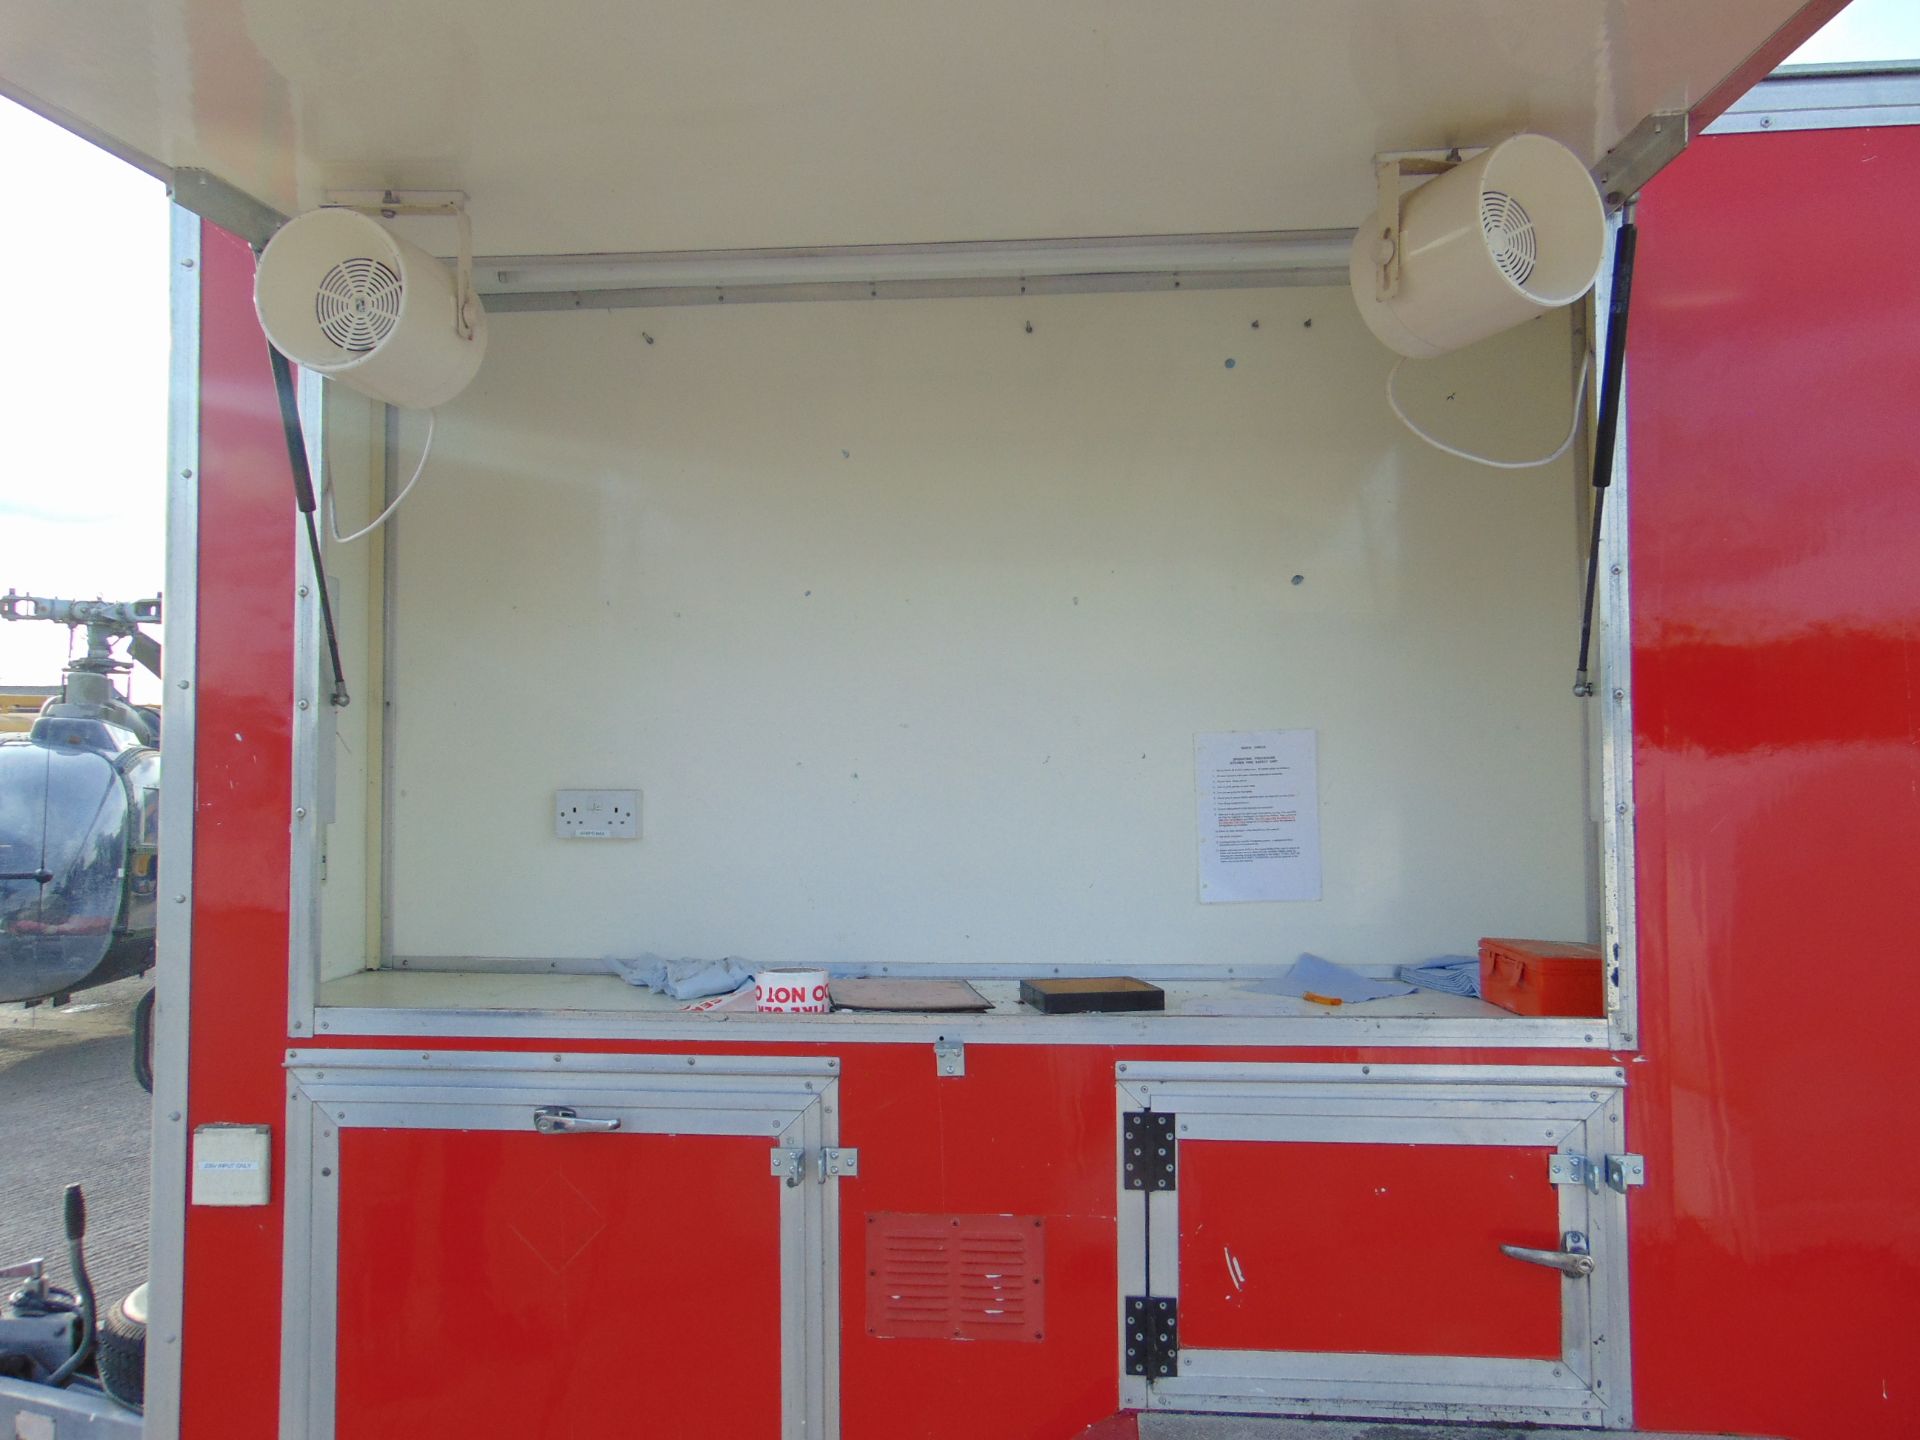 From UK Fire & Rescue Bingham 2 axle Show Trailer c/w spare wheel etc - Image 11 of 13